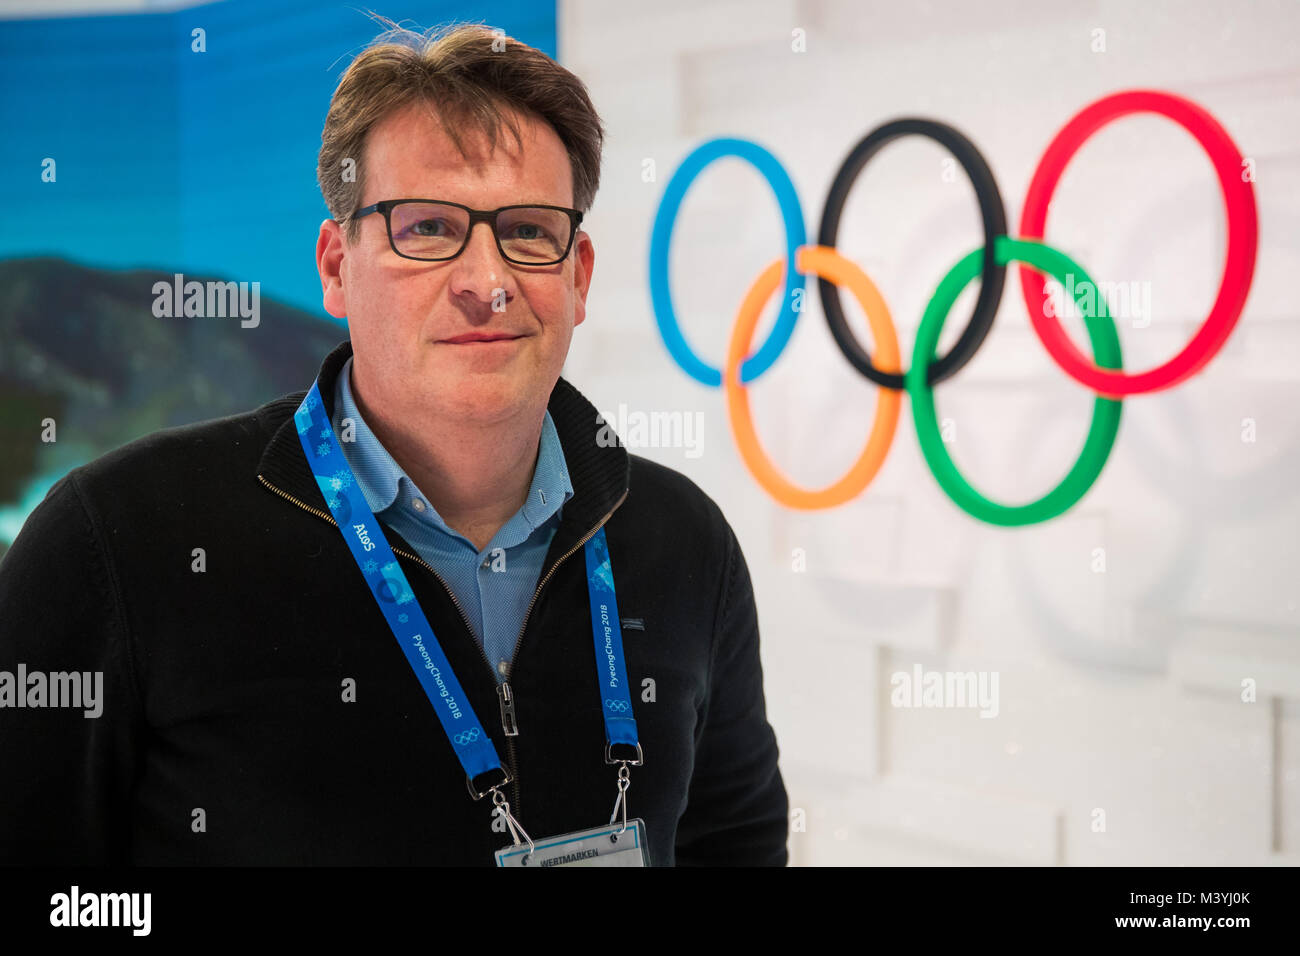 Pyeongchang, South Korea. 13th Feb, 2018. Thomas Fuhrmann, chief editor at the sports desk of German broadcaster ZDF, stands in the studio of the International Broadcast Centre (IBC) in Pyeongchang, South Korea, 13 February 2018. Credit: Daniel Karmann/dpa/Alamy Live News Stock Photo